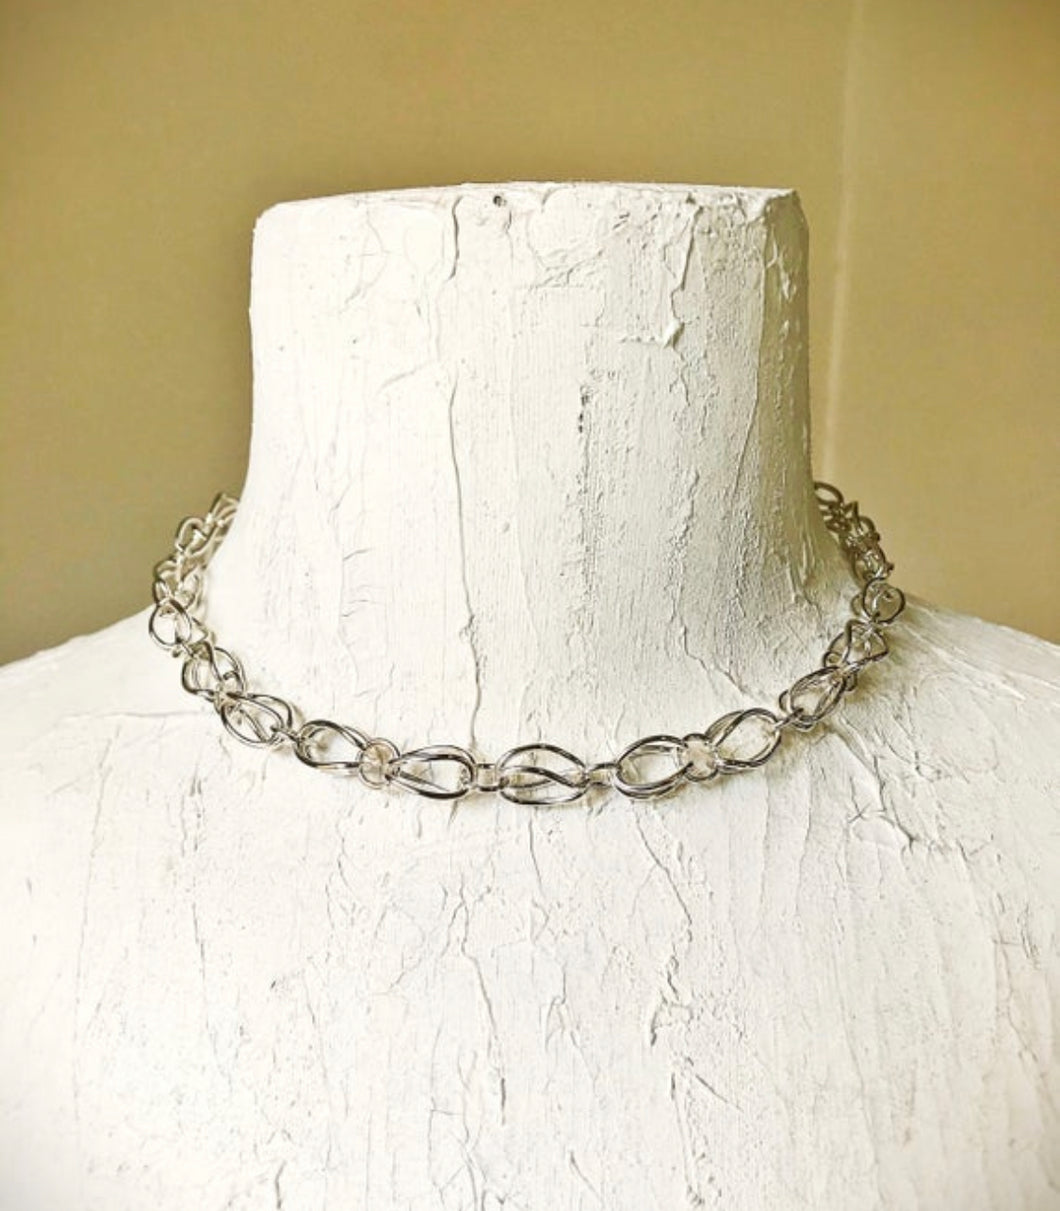 Twisted Sister Necklace - Sterling silver - Obscuro Jewelry